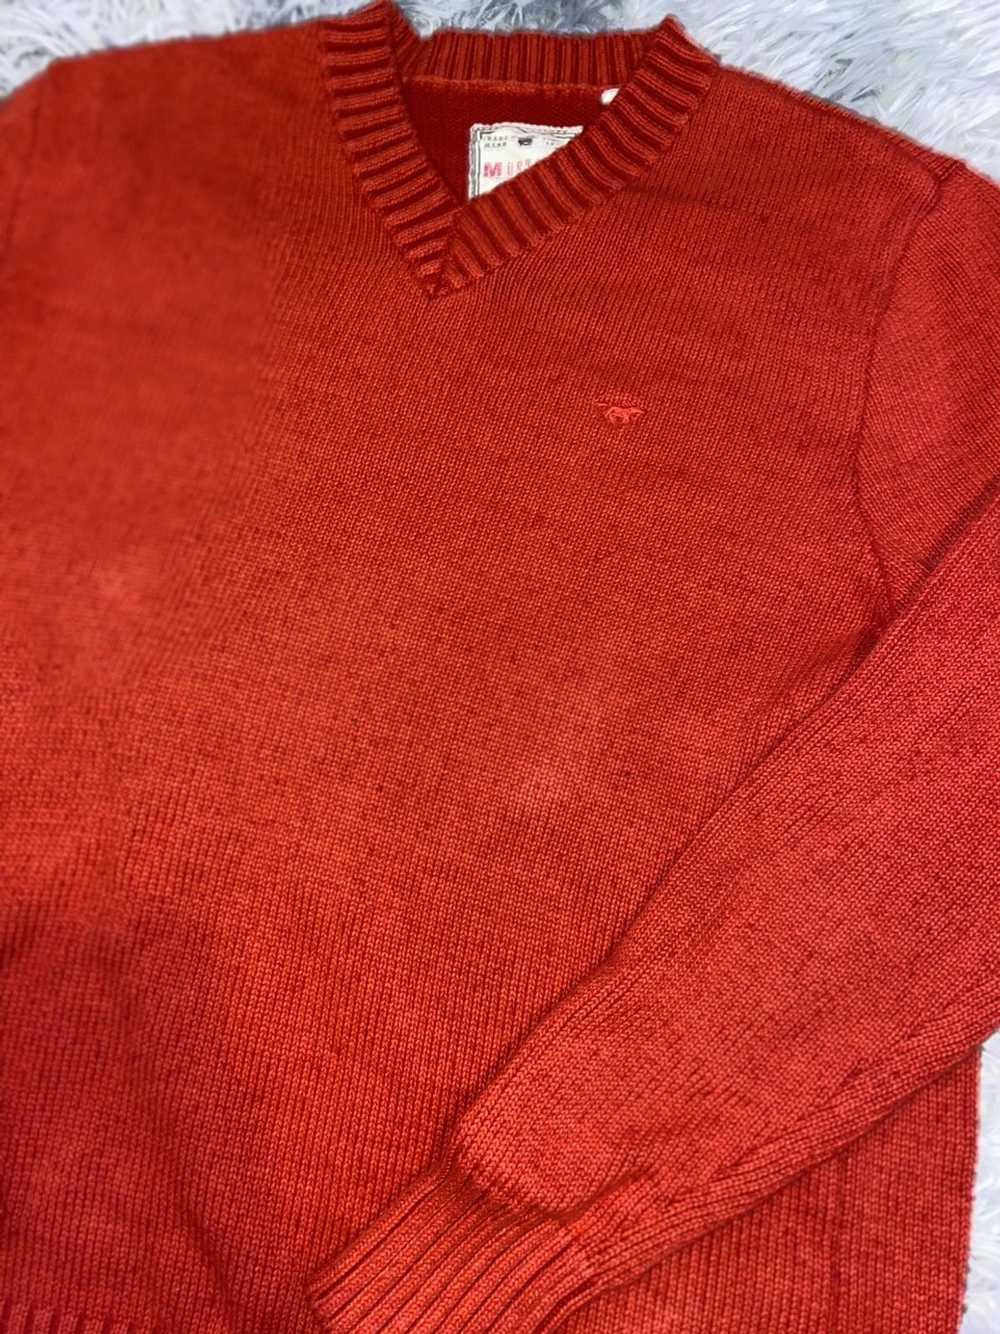 Mustang × Vintage RARE RED MUSTANG SWEATER SIZE L… - image 2